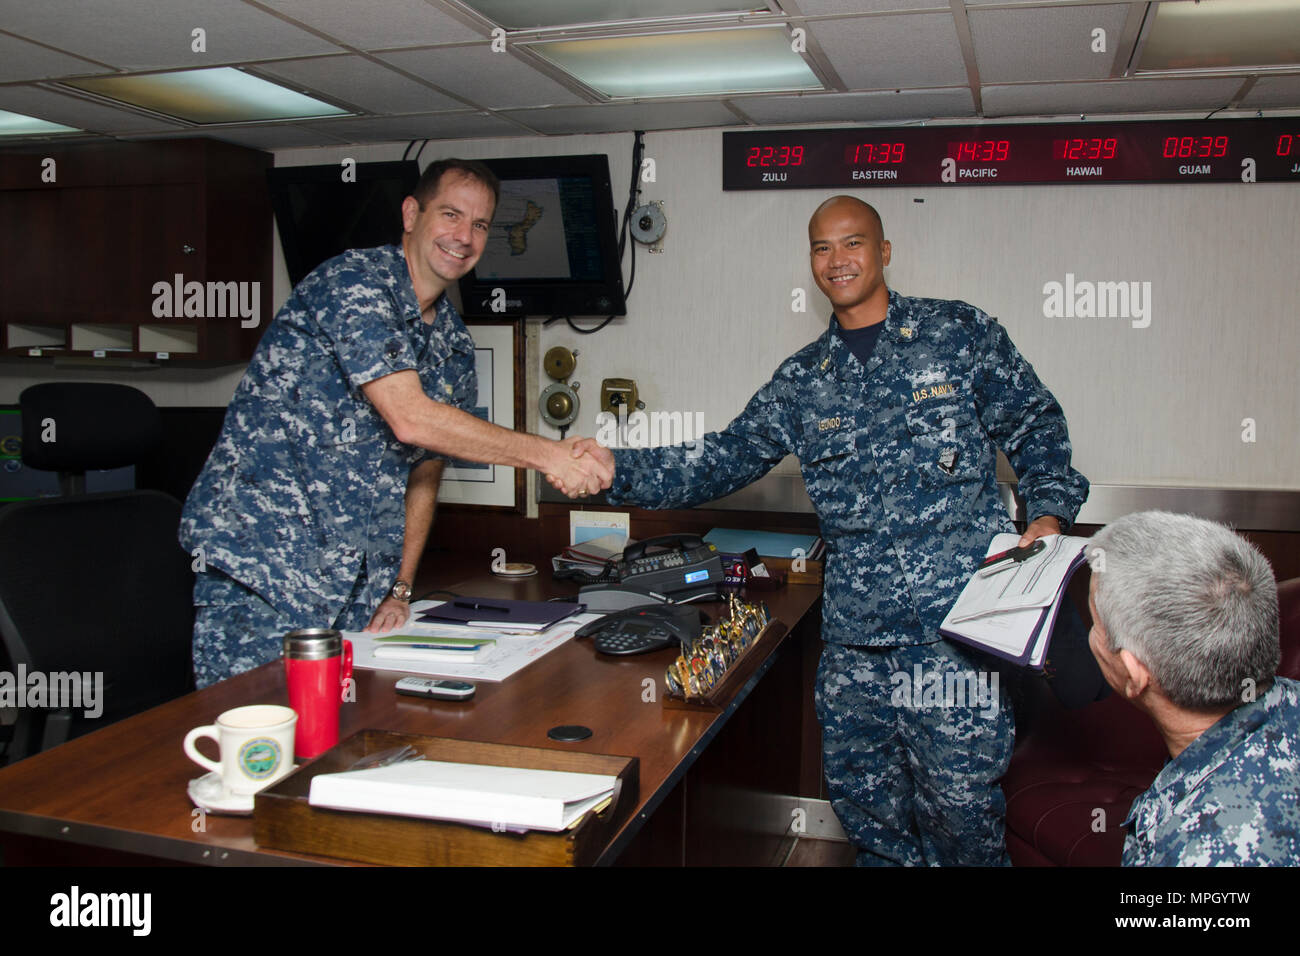 SANTA RITA, Guam - The submarine tender USS Frank Cable (AS 40) Commanding Officer Capt. Drew St. John congratulated Chief Damage Controlman Cyprus V. Abundo, native of Angeles City, Philippines, for his selection as the winner of the 2016 GEICO Military Service Award - Fire Safety and Prevention, Feb. 10.  Frank Cable, forward deployed to the island of Guam, conducts maintenance and support of submarines and surface vessels deployed to the U.S. 5th and 7th Fleet area of operations.  (U.S. Navy photo by Mass Communication Specialist 3rd Class Alana Langdon/Released) Stock Photo